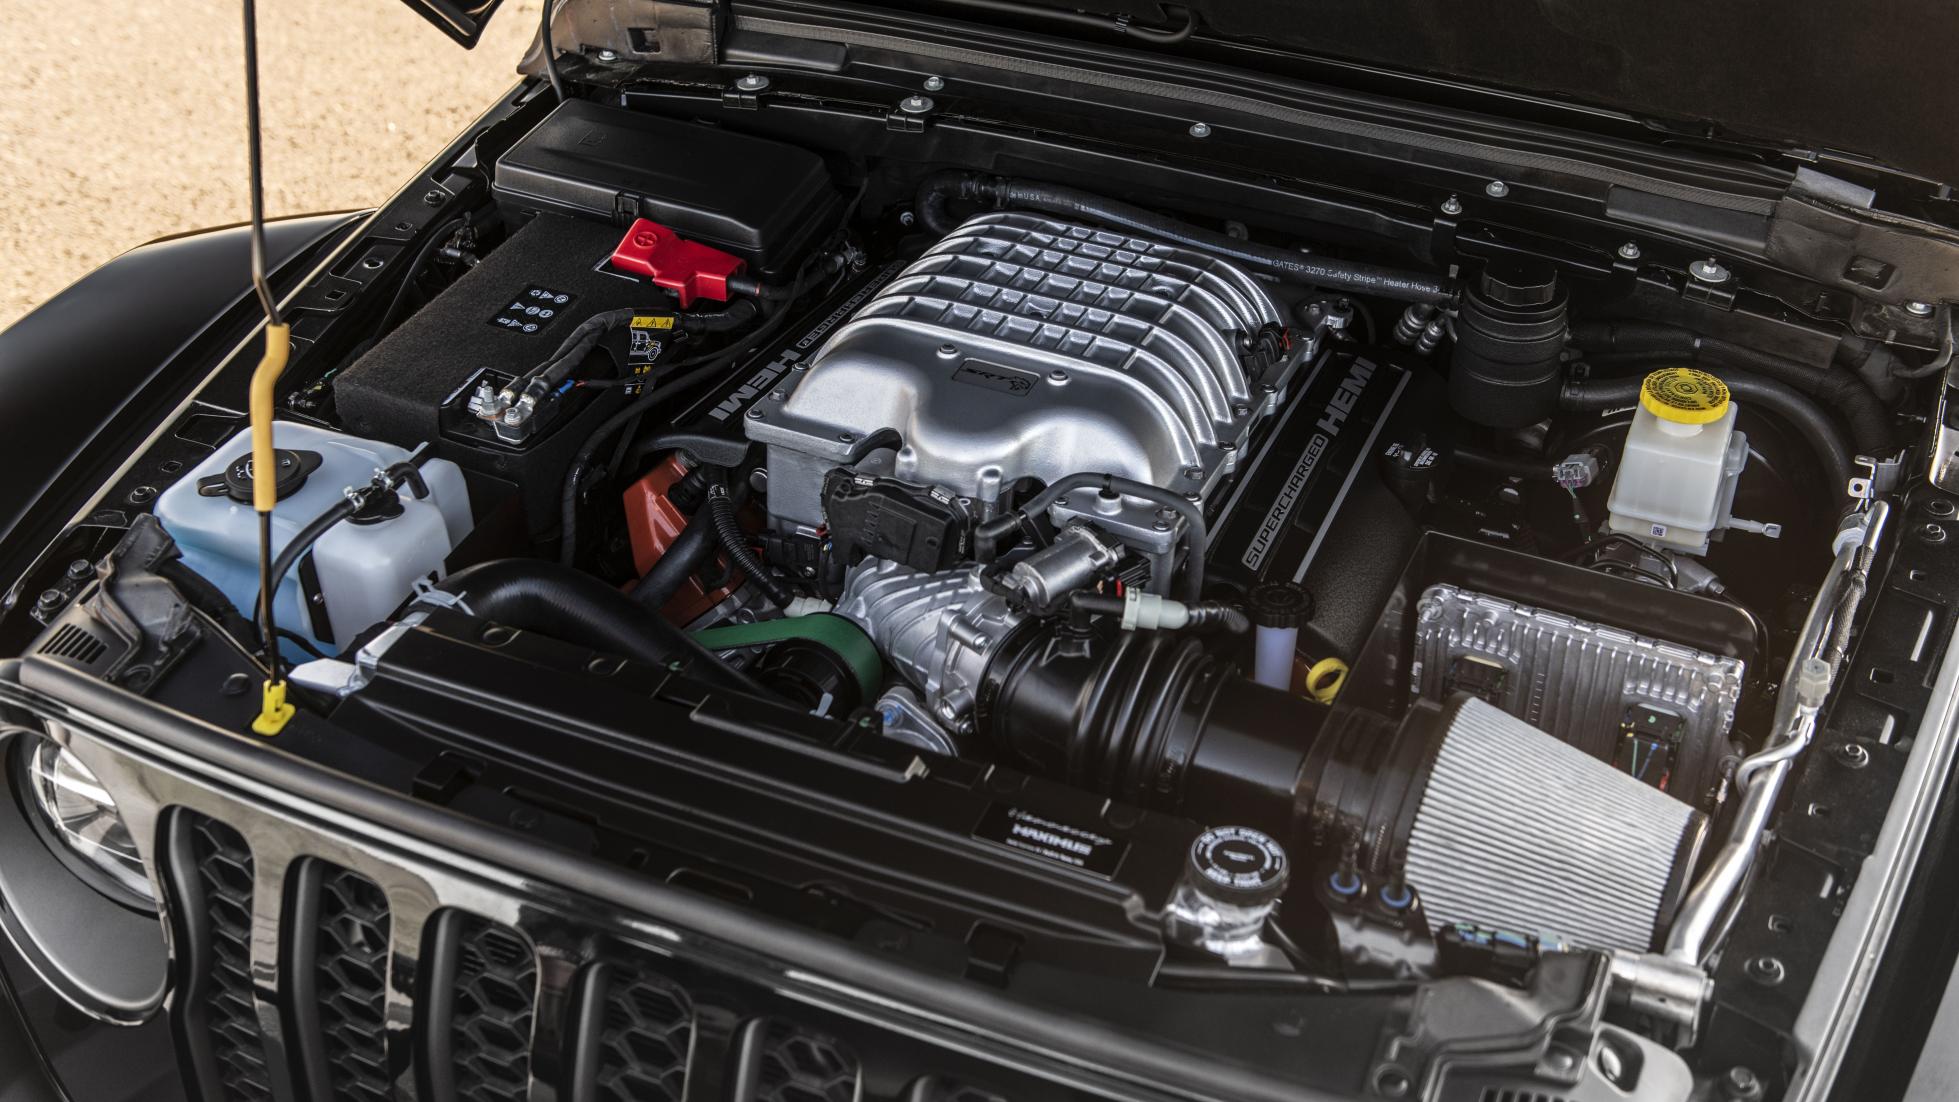 Hennessey builds first 1,000bhp Maximus Jeep Gladiator